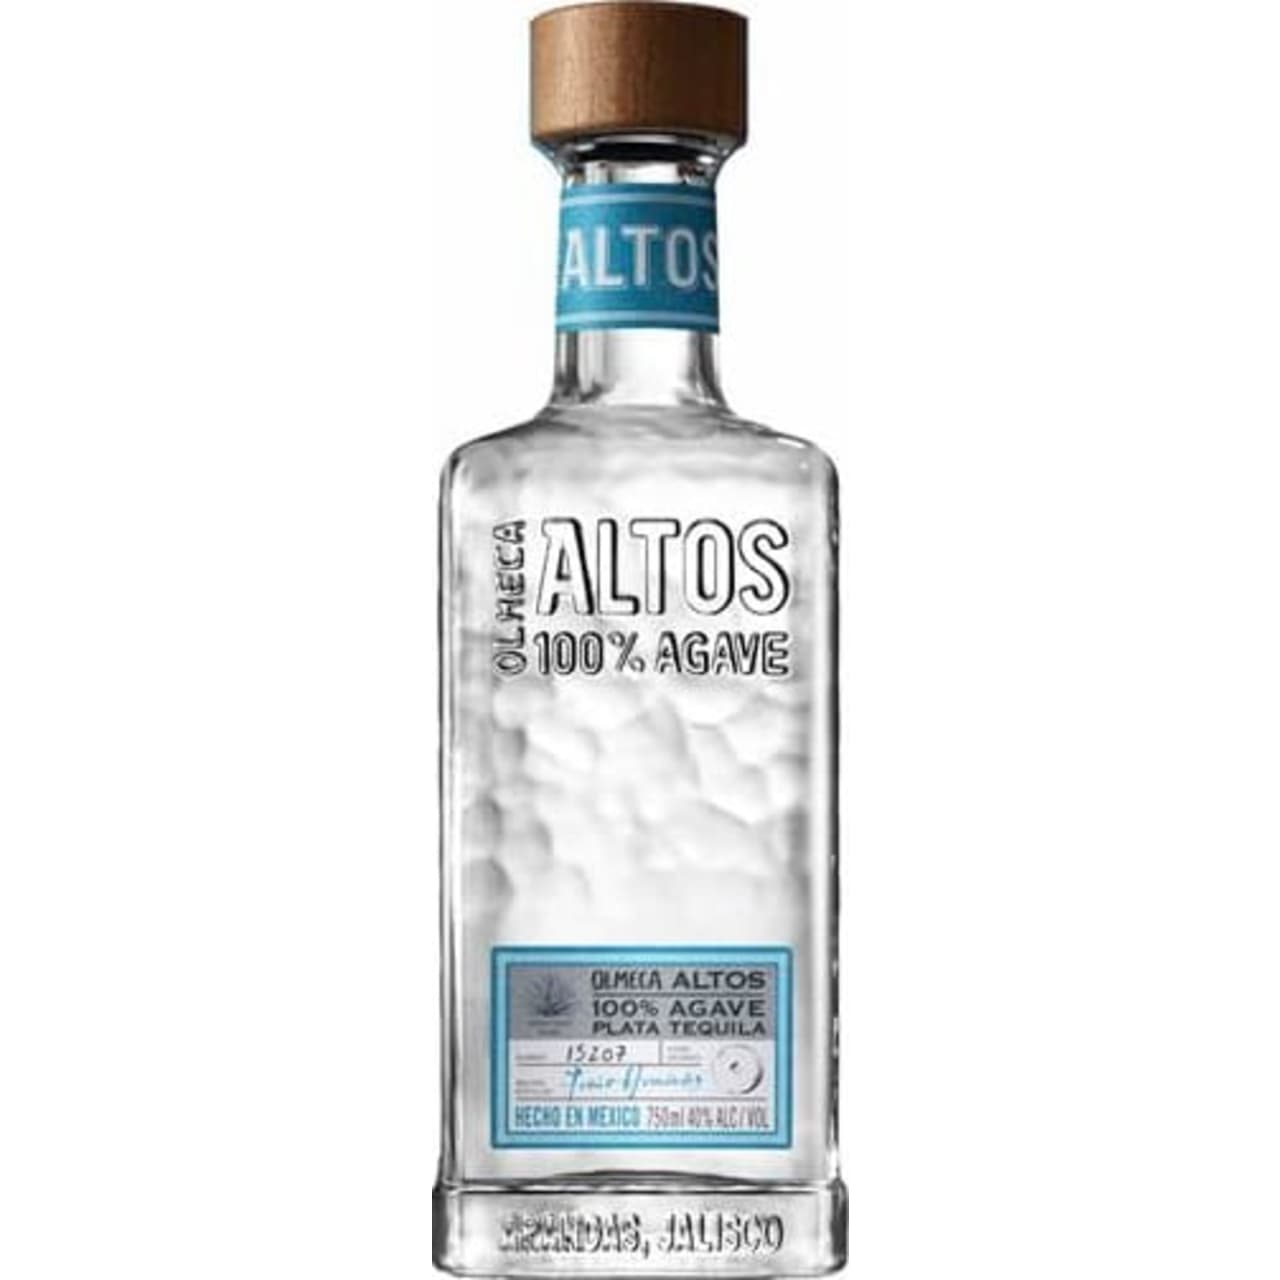 A step up from the standard-issue Olmeca, the name 'Altos' refers to the highlands of the Tequila-producing region in Mexico, where the best 100% agave Tequilas are made.